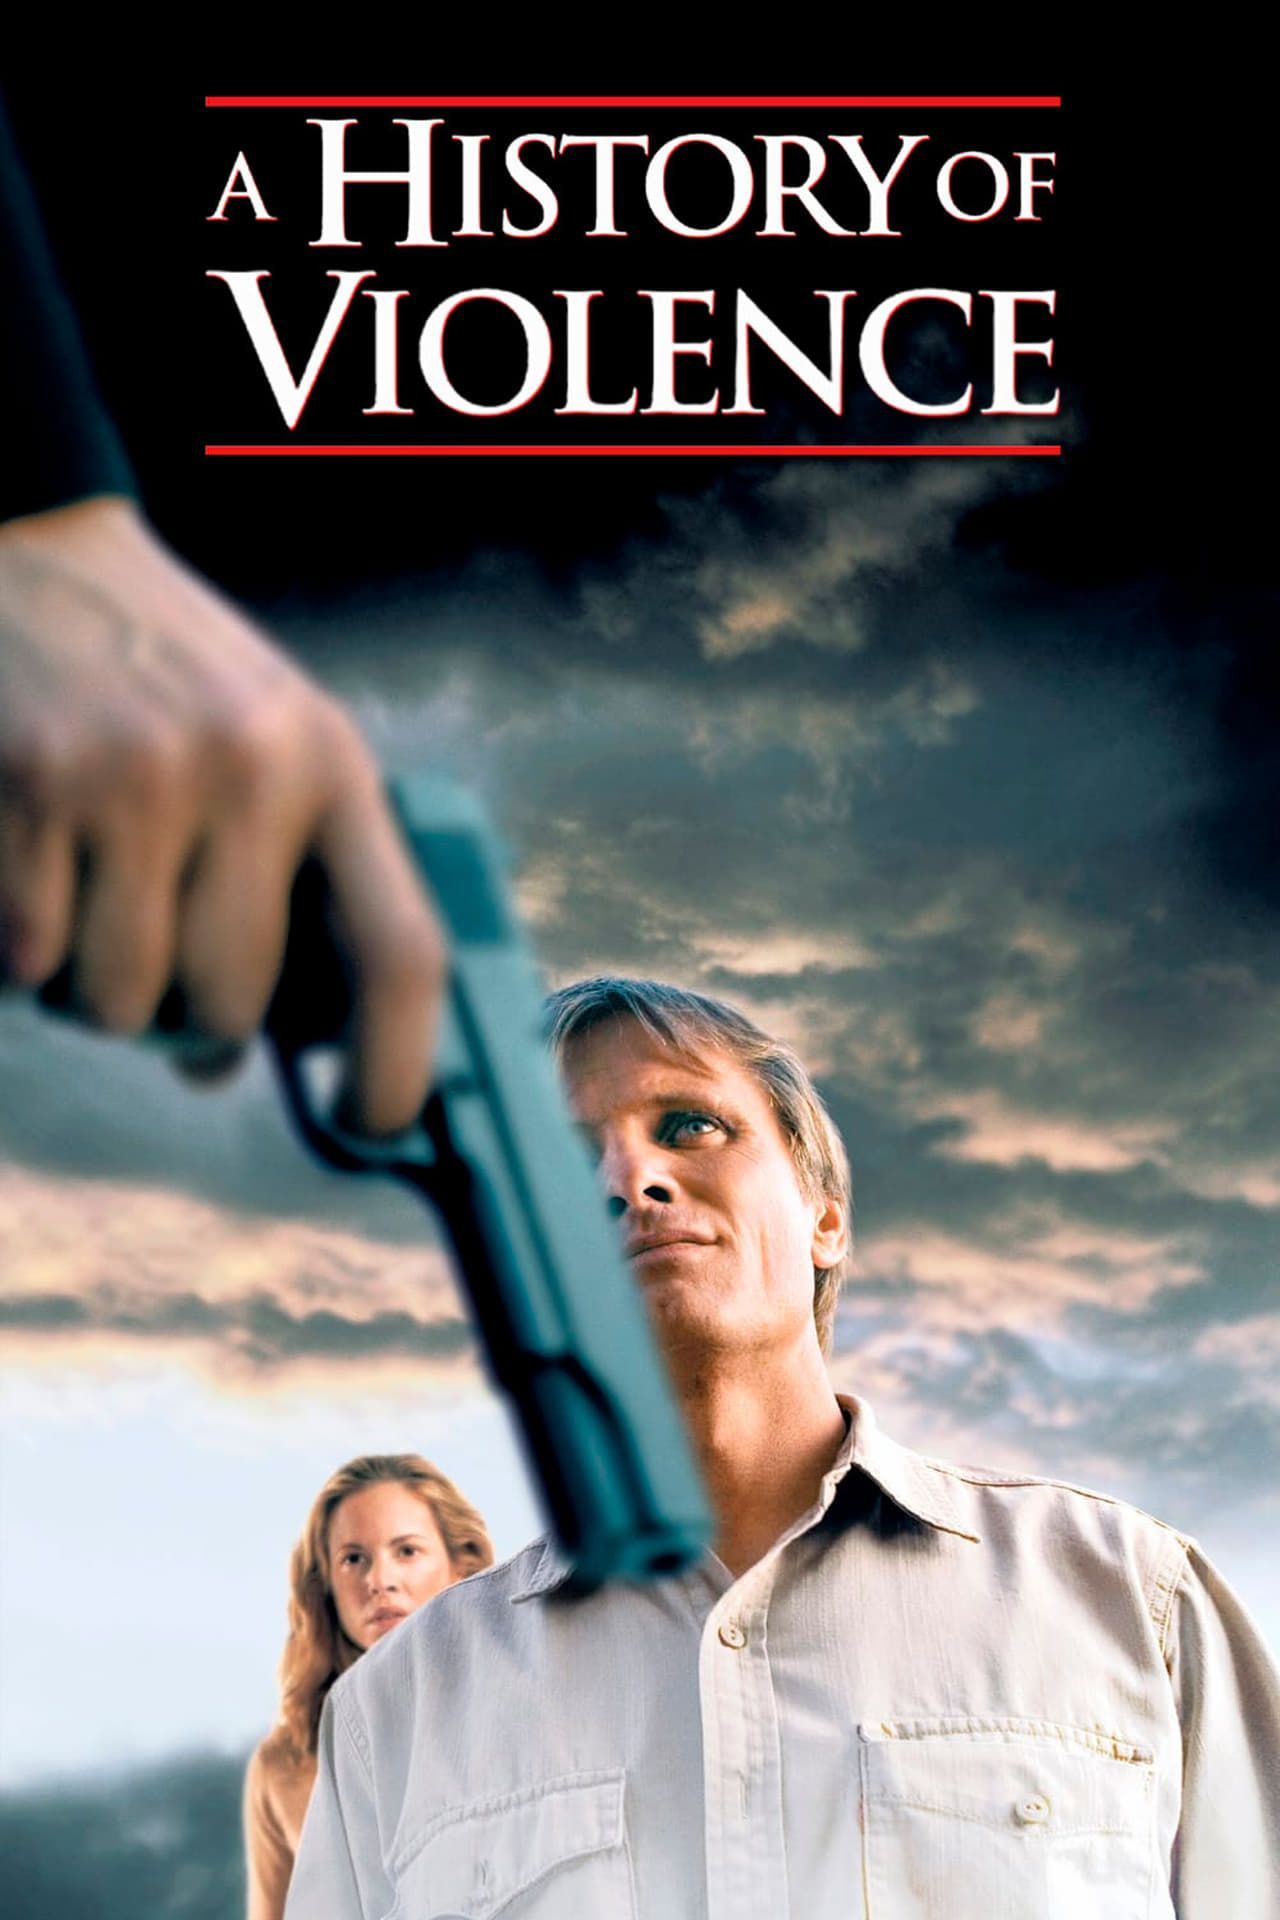 A History of Violence Movie Poster showing A person Holding a Gun in Front of Viggo Mortensen's face